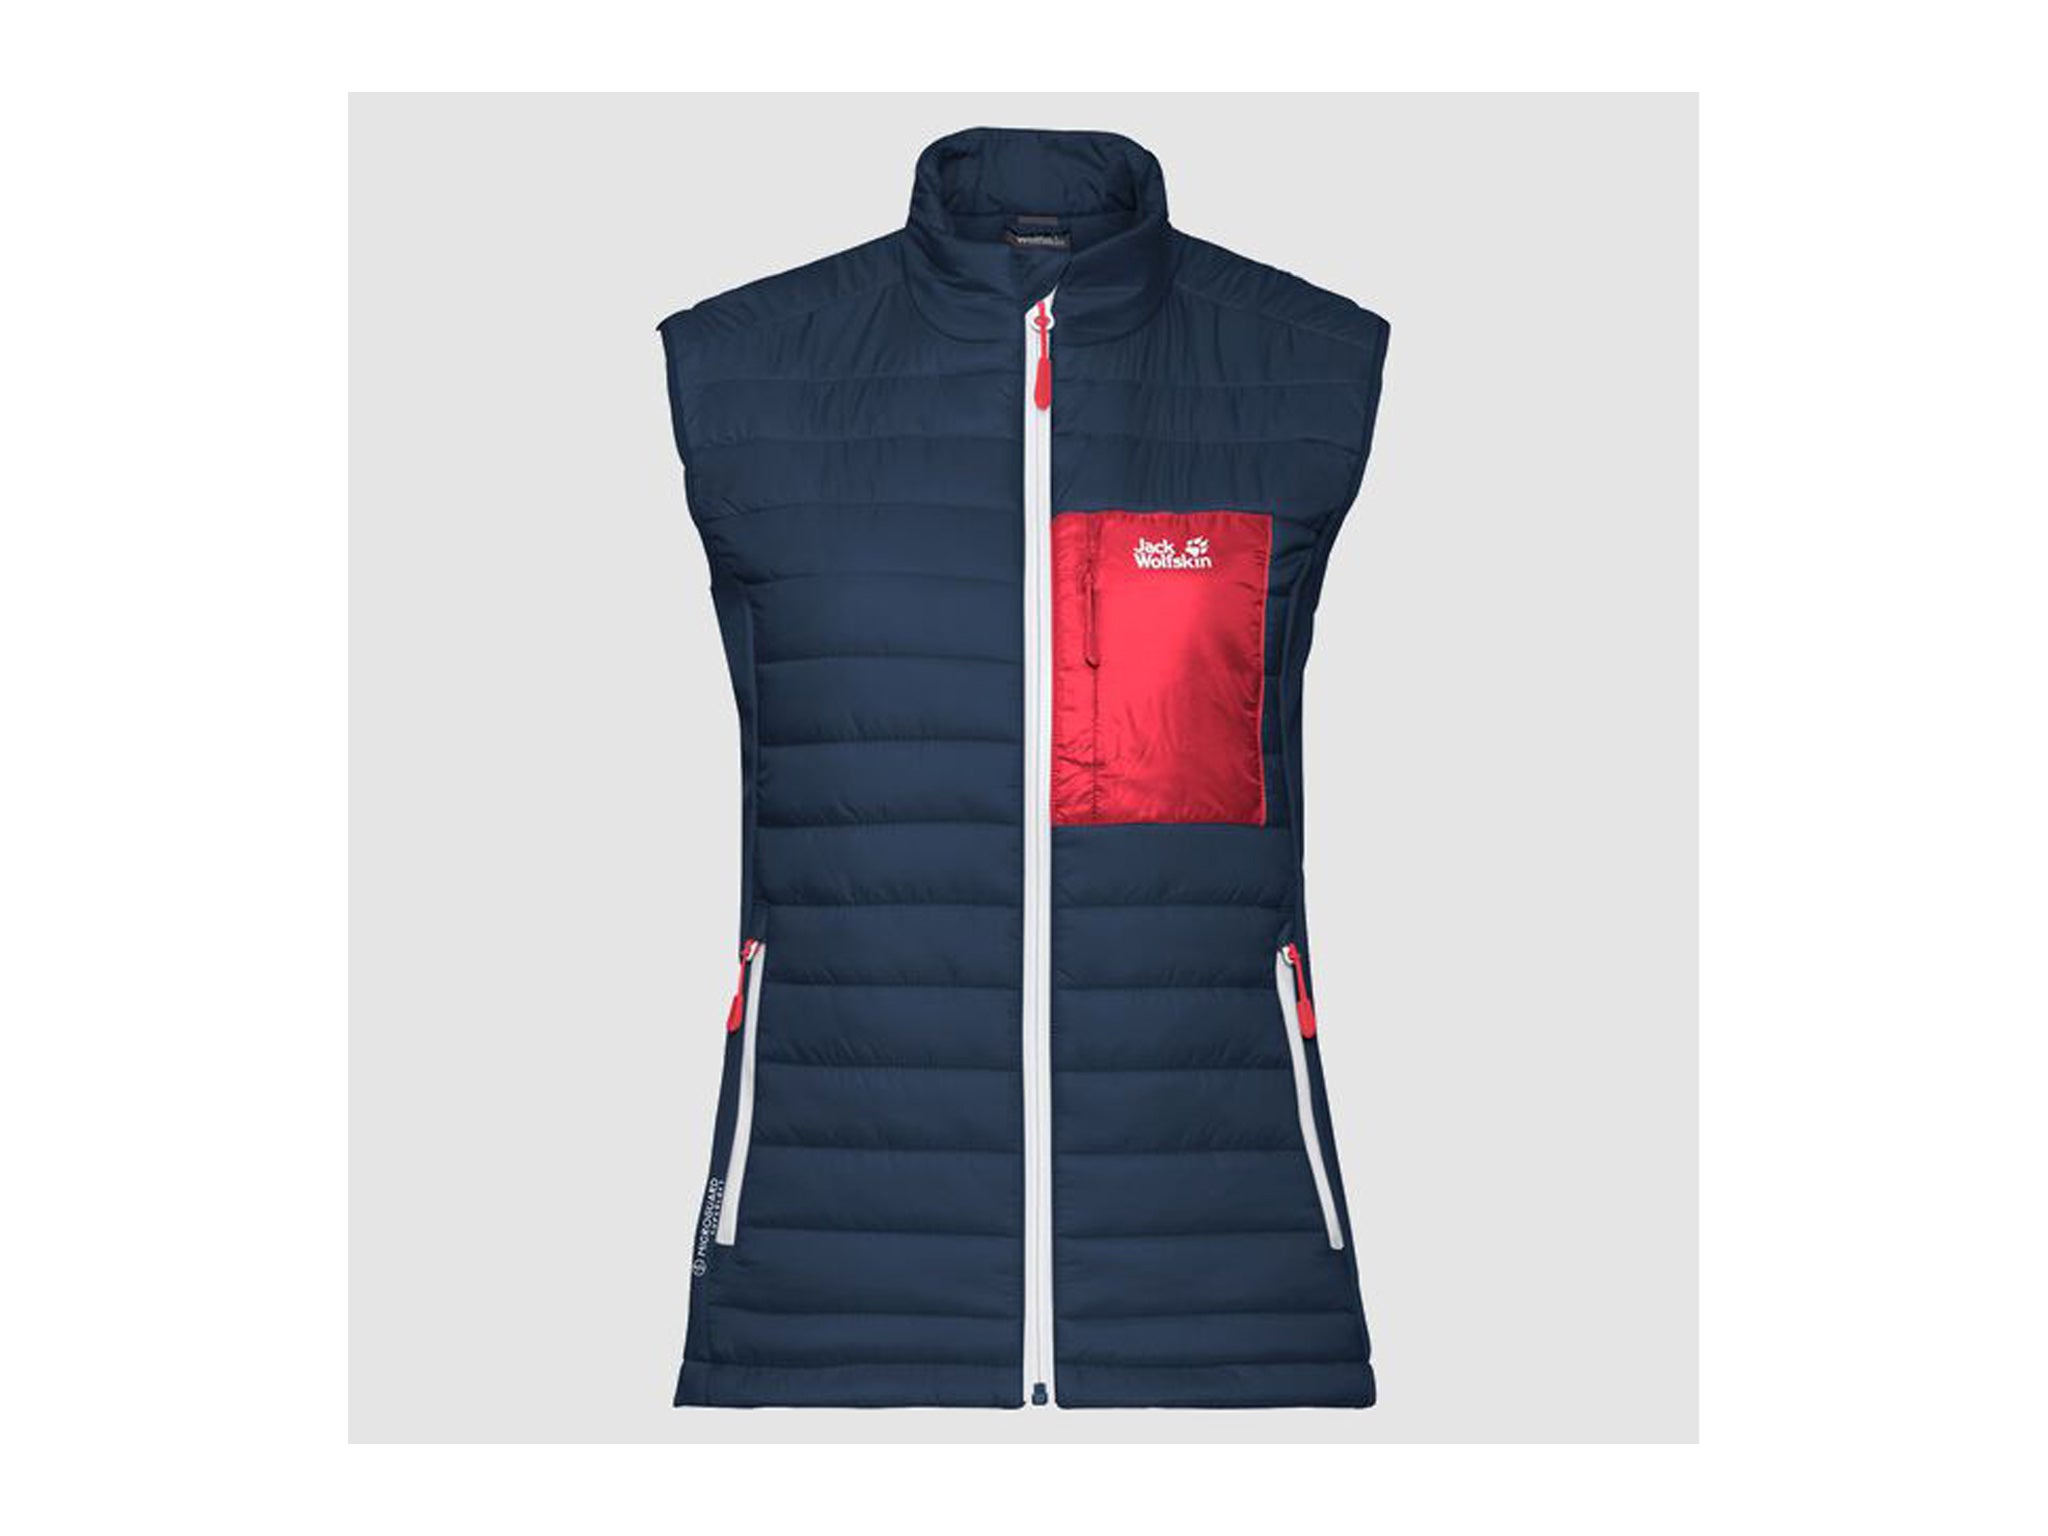 Save 20% S Red Womens Clothing Jackets Waistcoats and gilets Jack Wolfskin Tech Fabric Mix Womens Gilet 